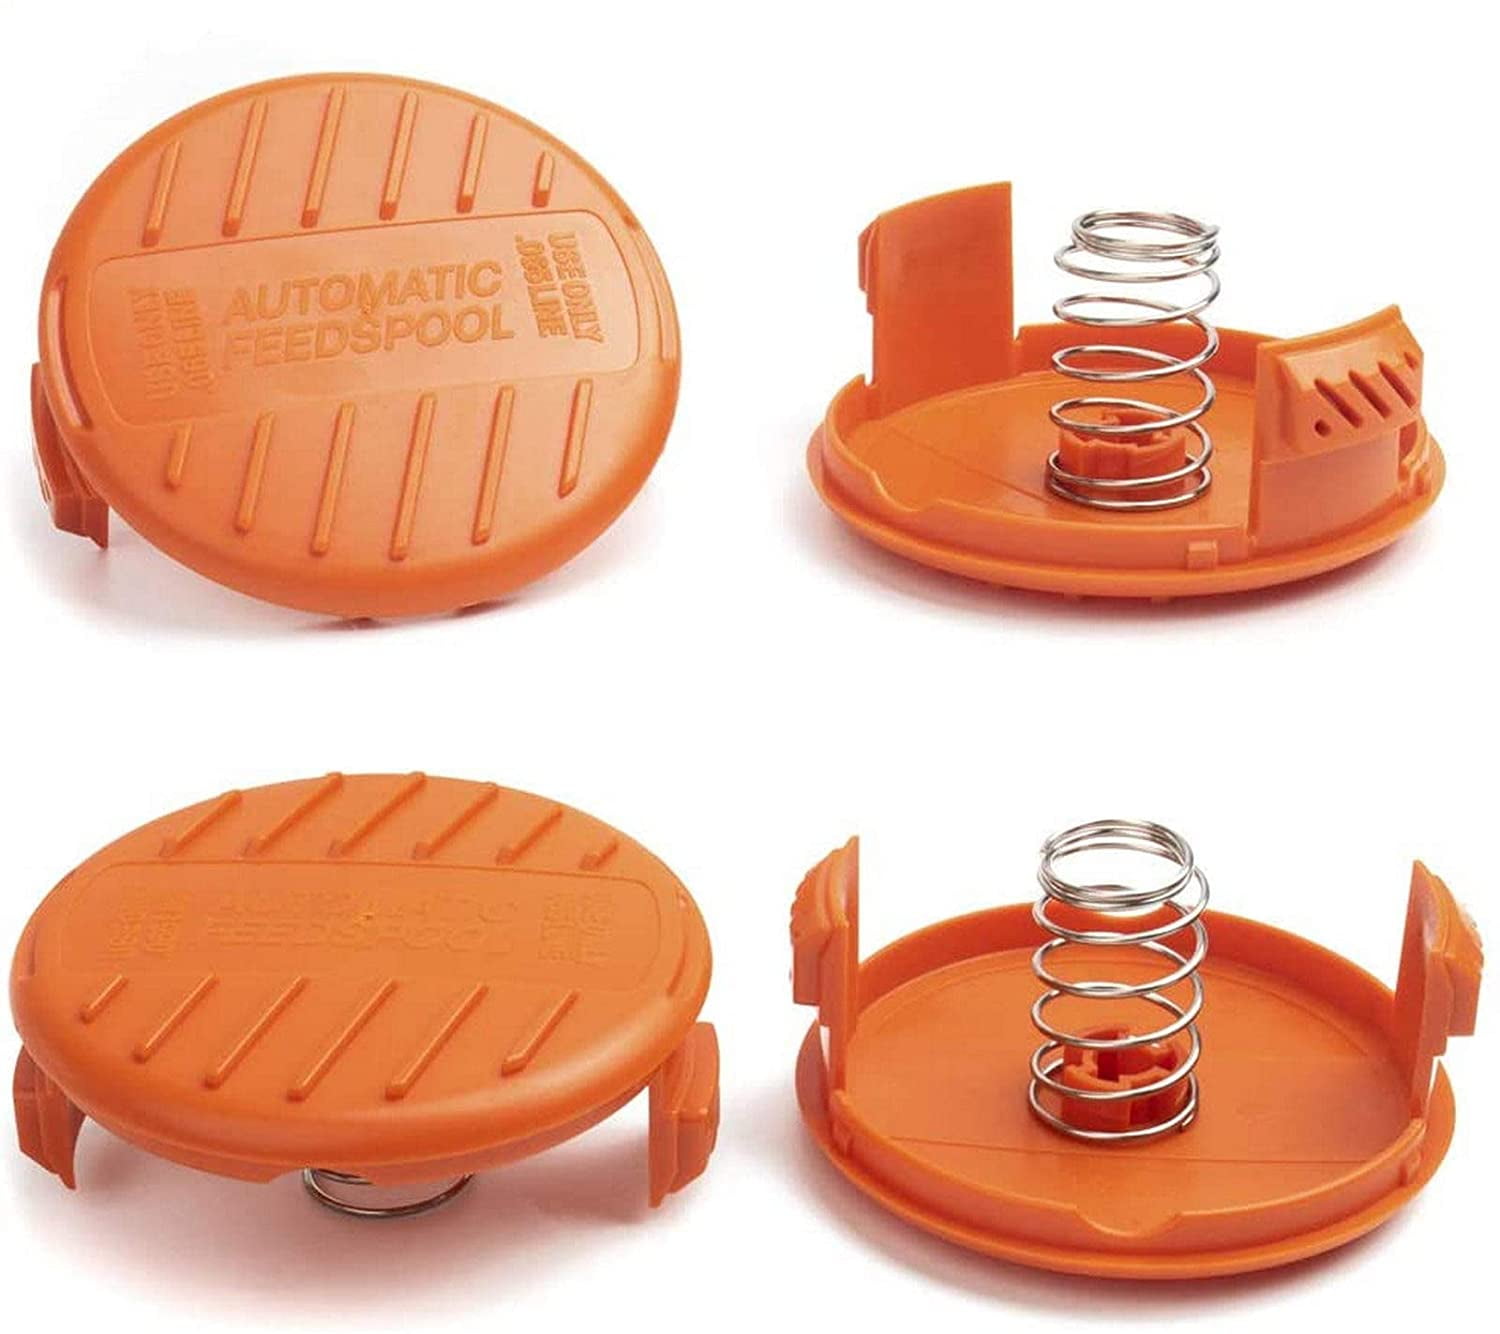 Black & Decker GH3000 Trimmer (2 Pack) Replacement Cap Assembly #90583594-2pk